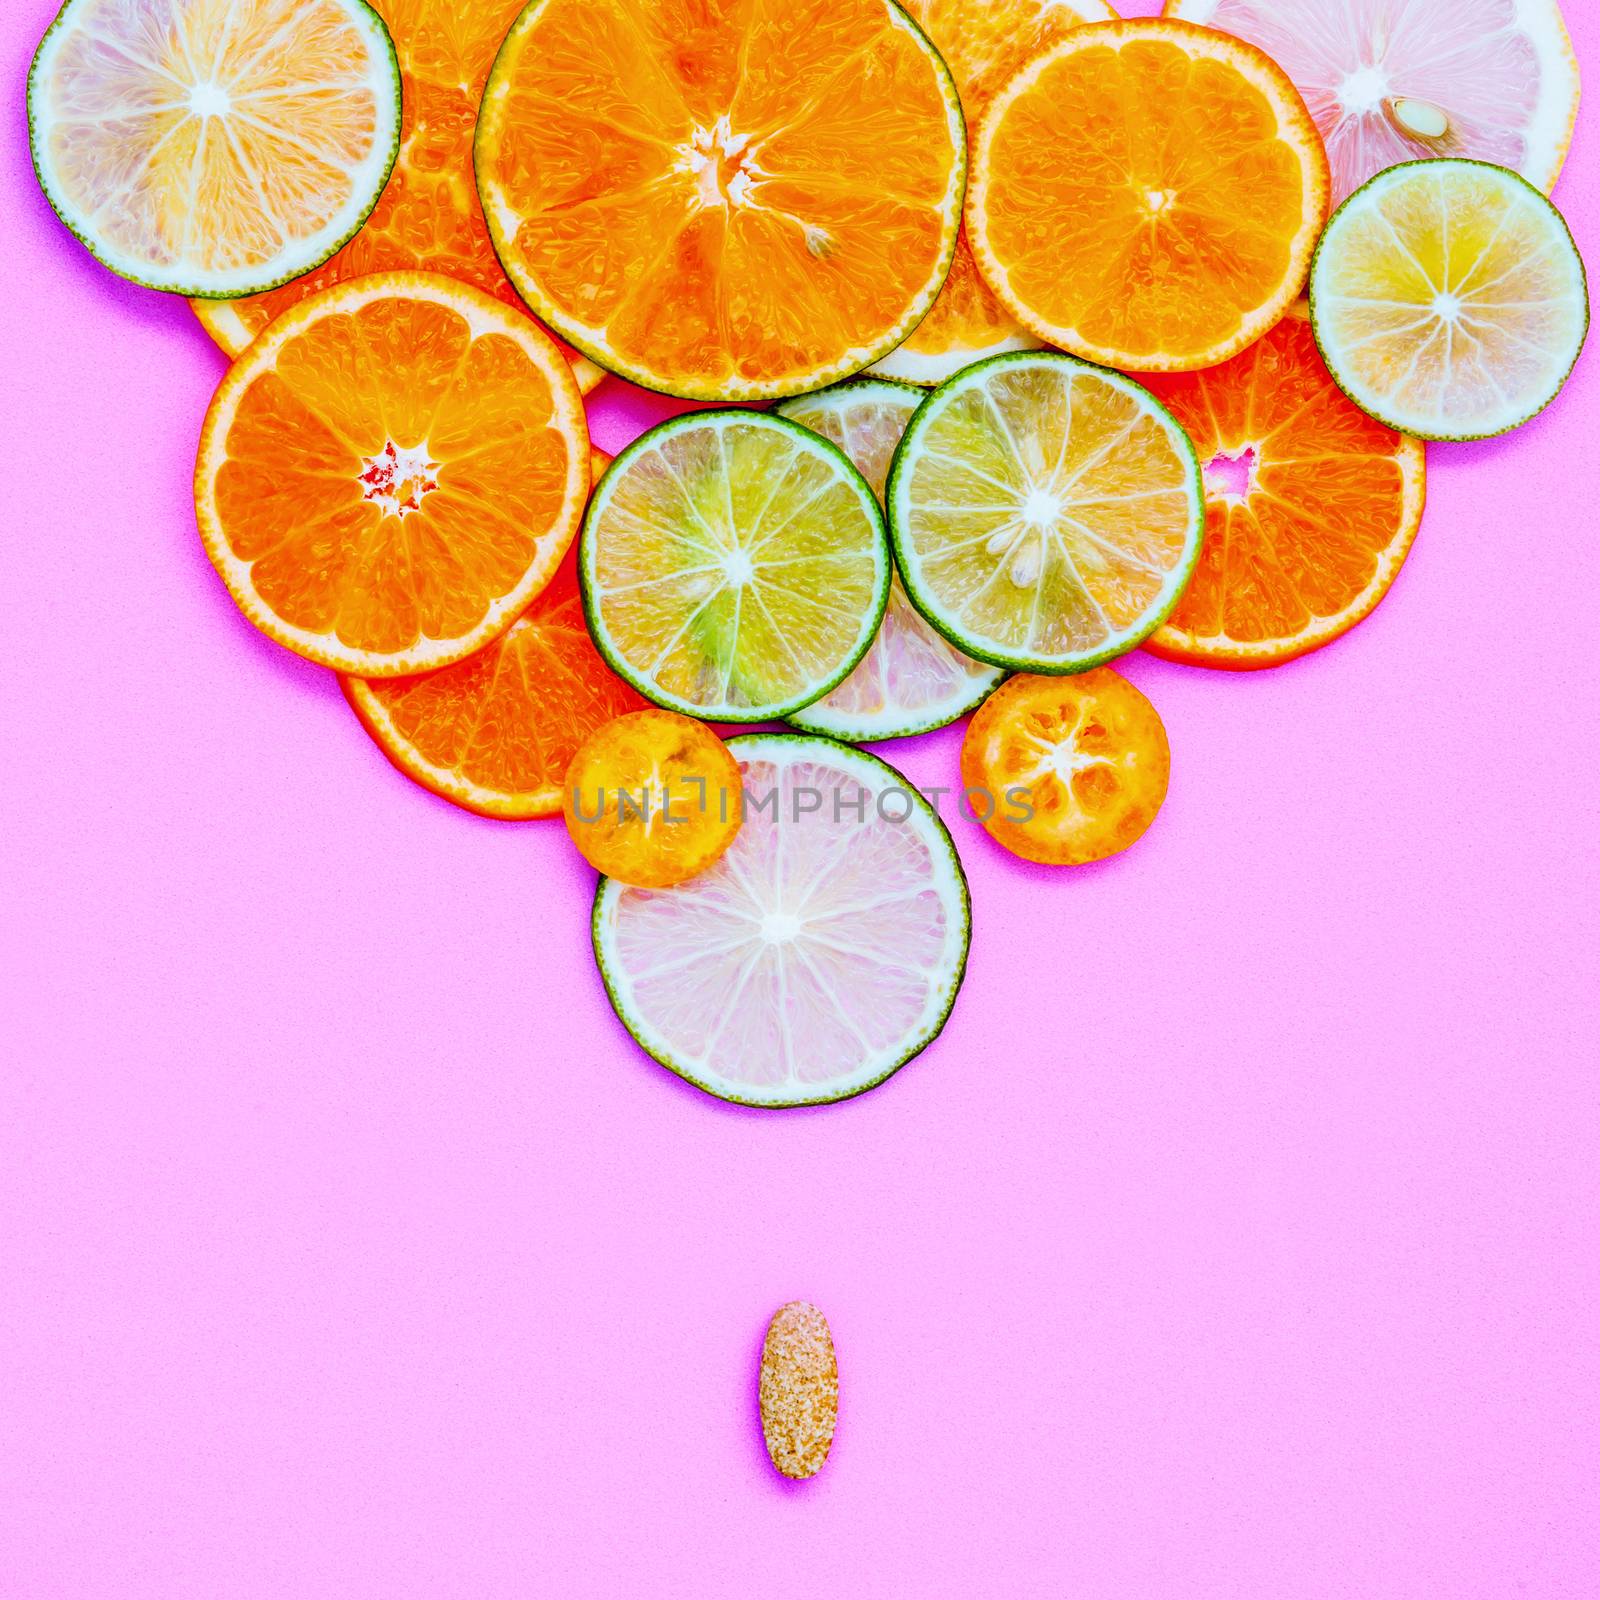 Healthy foods and medicine concept. Pill of vitamin C and variou by kerdkanno